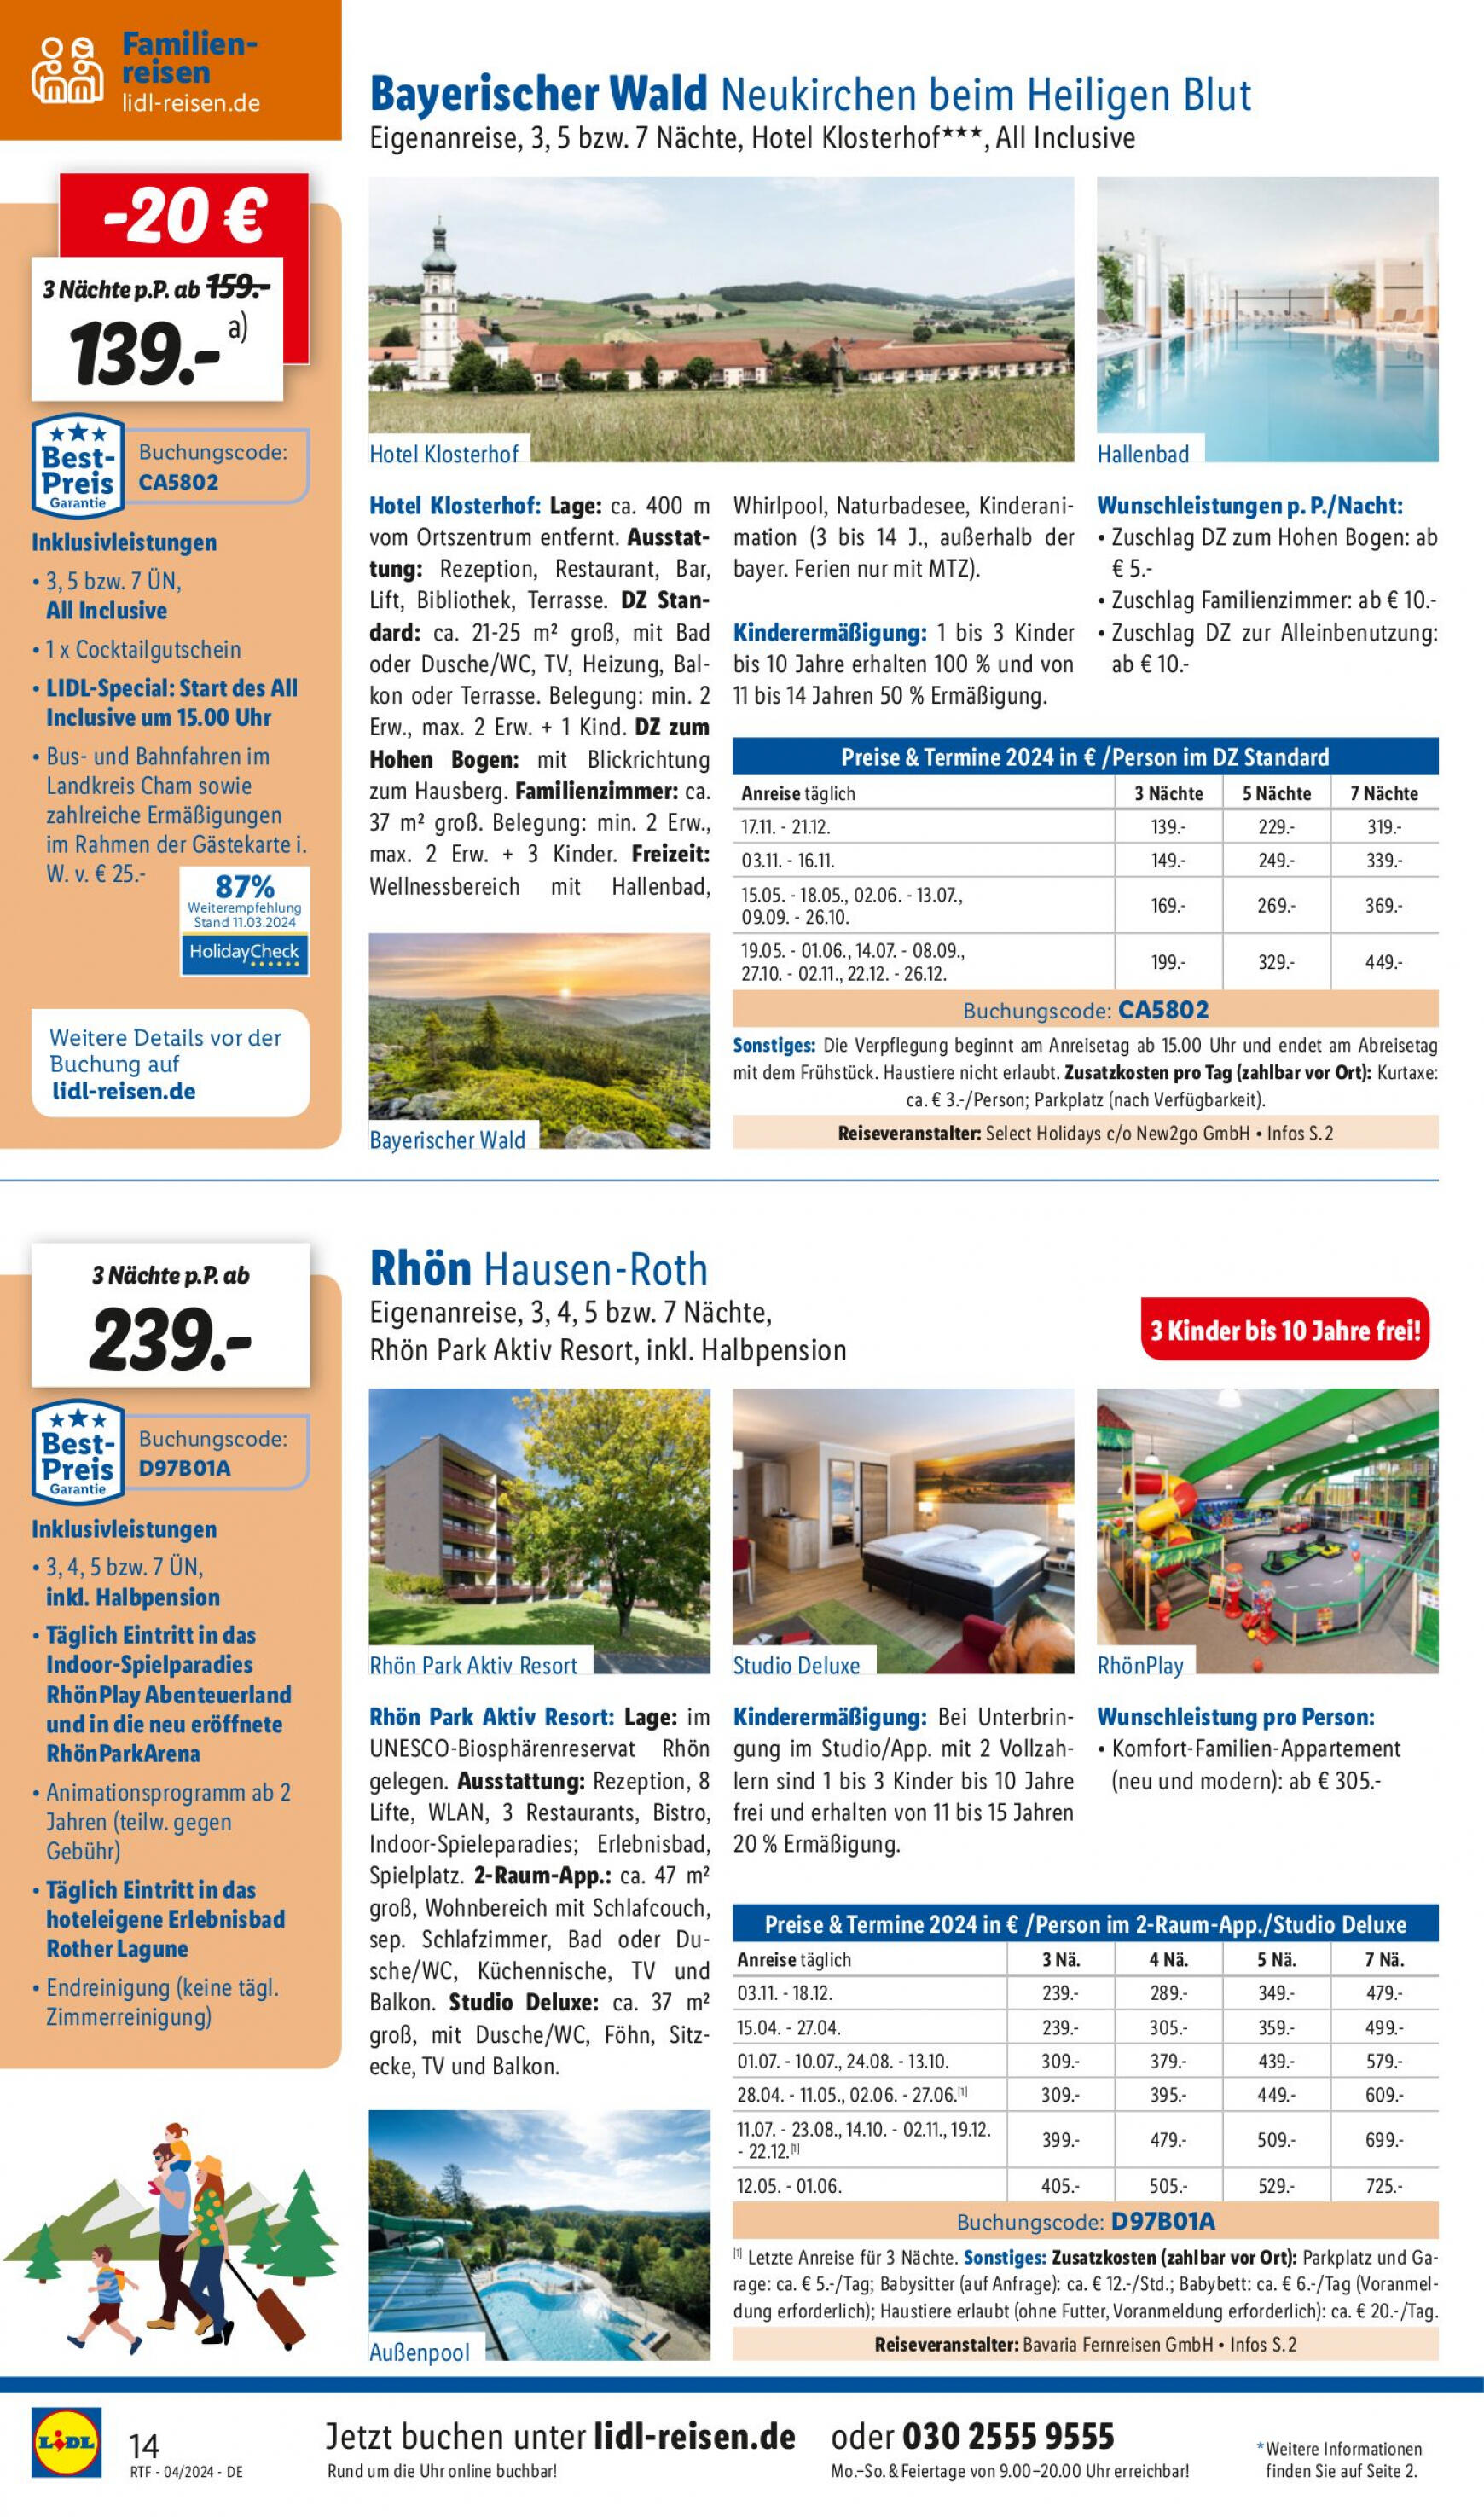 lidl - Flyer Lidl - Sommerschnäppchen aktuell 13.04. - 15.05. - page: 14